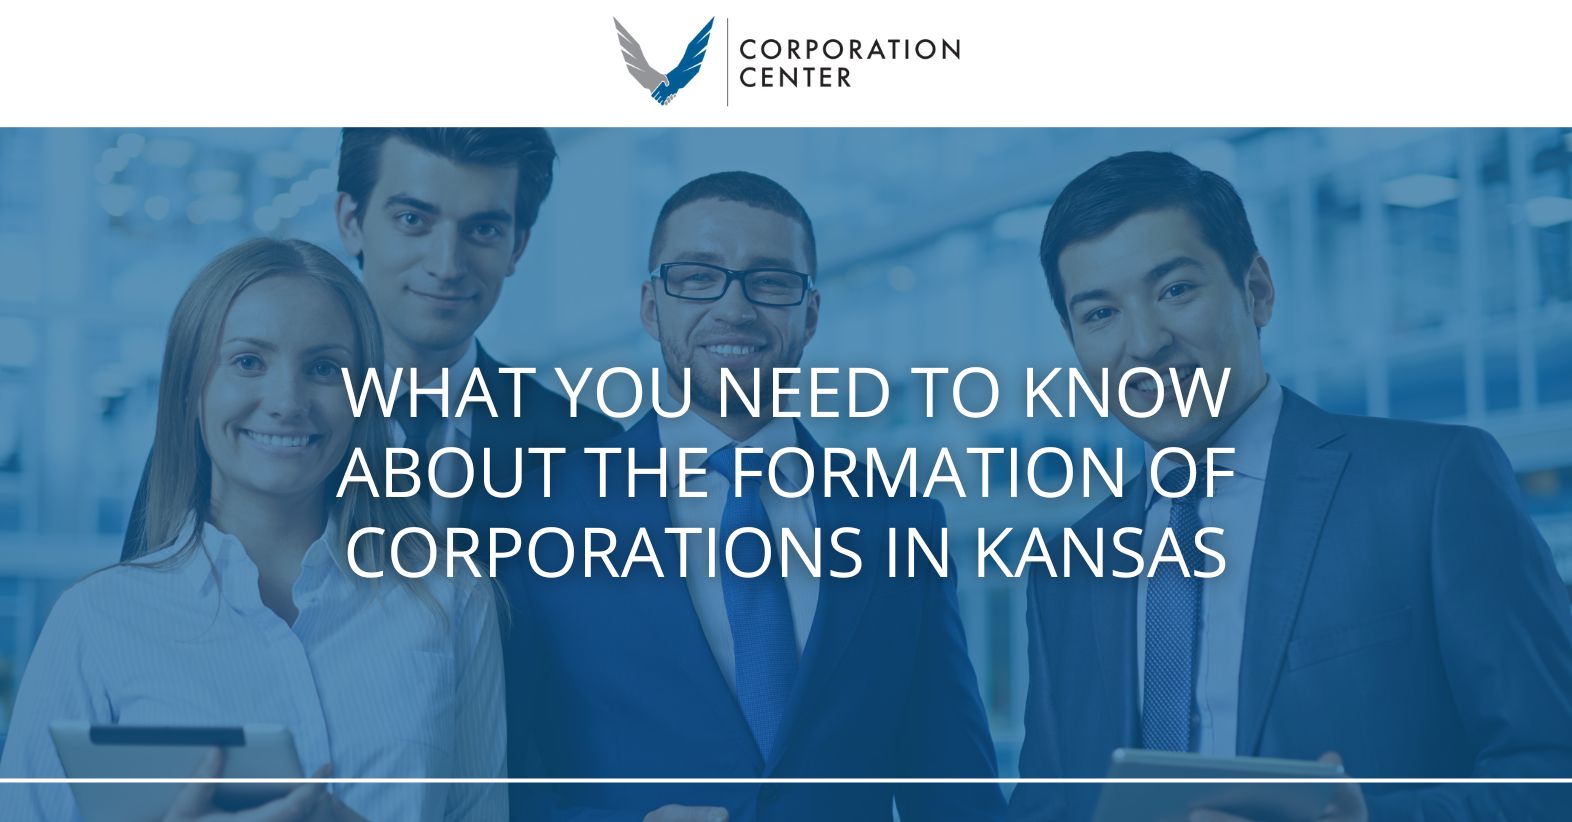 Formation of Corporations in Kansas